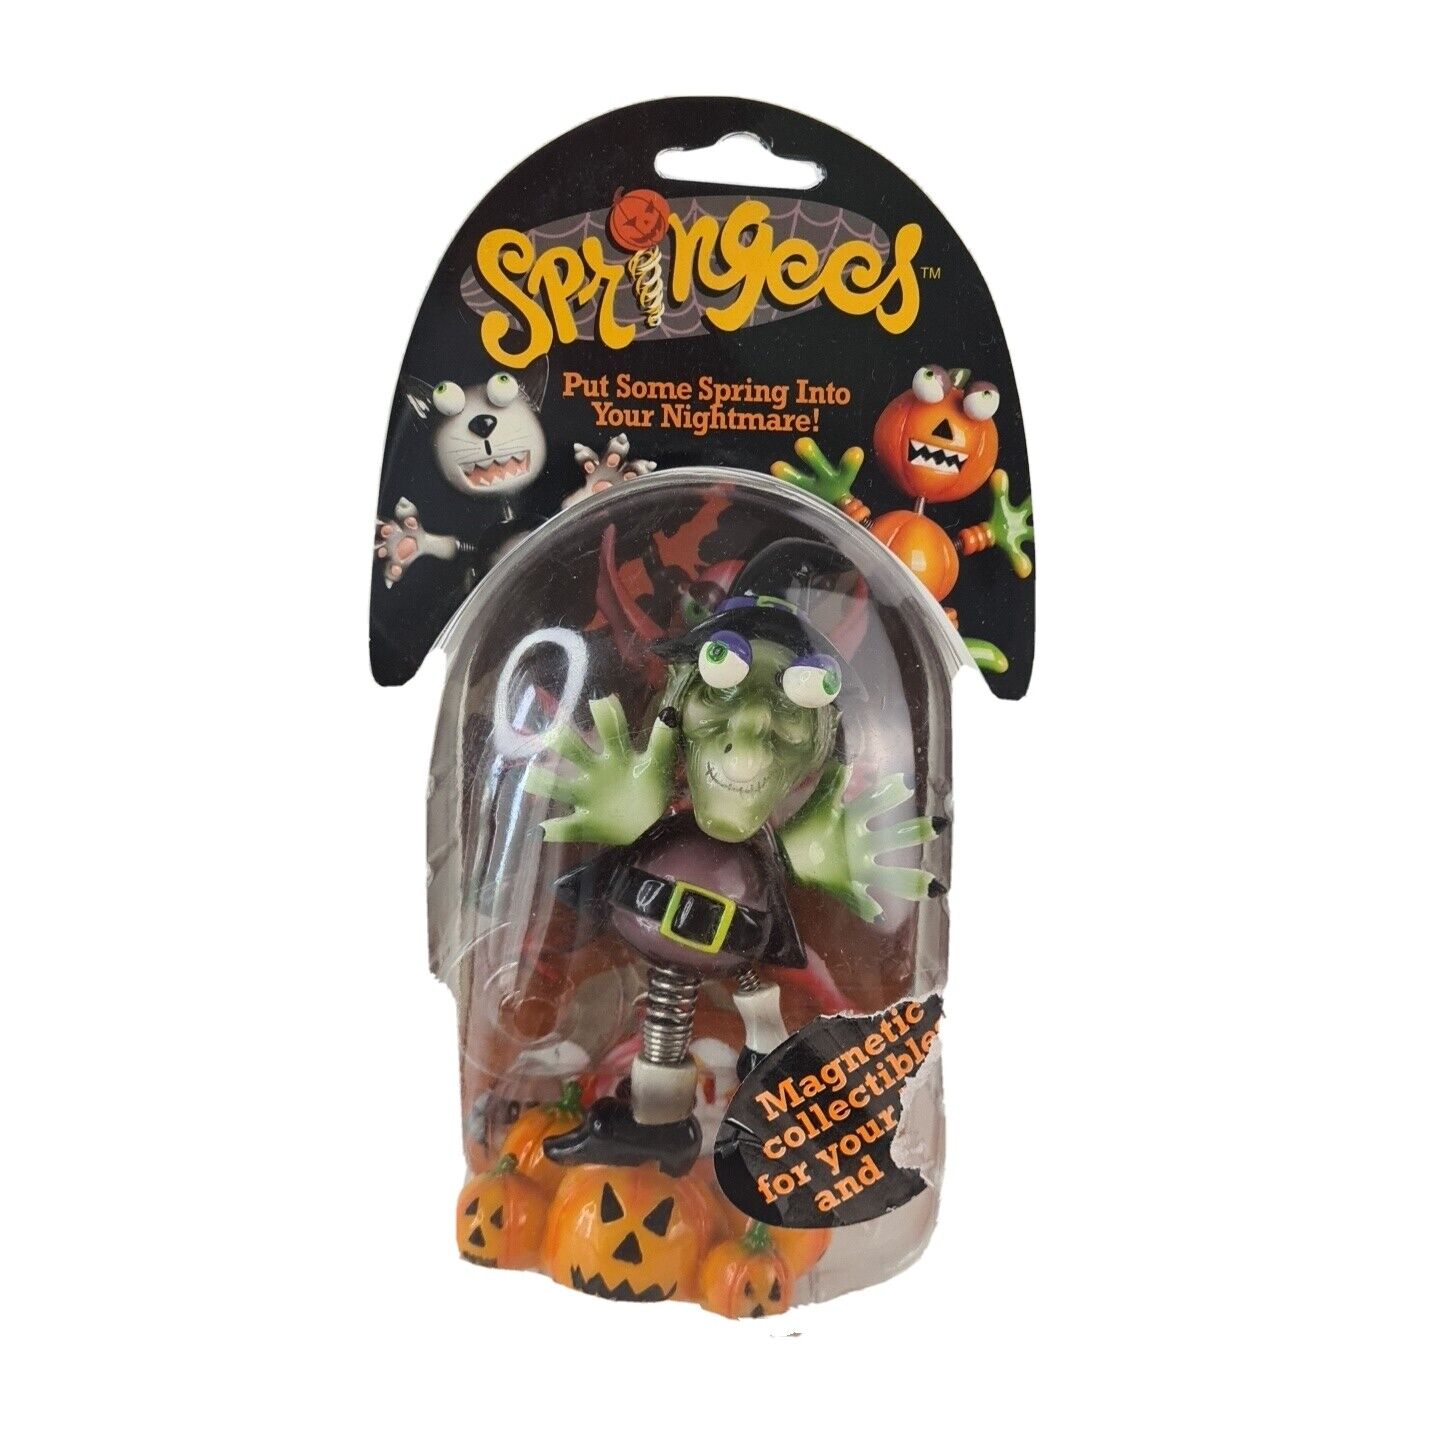 🚨 Exhart Company Halloween “Springees” Witch Nodder Magnetic Vintage 